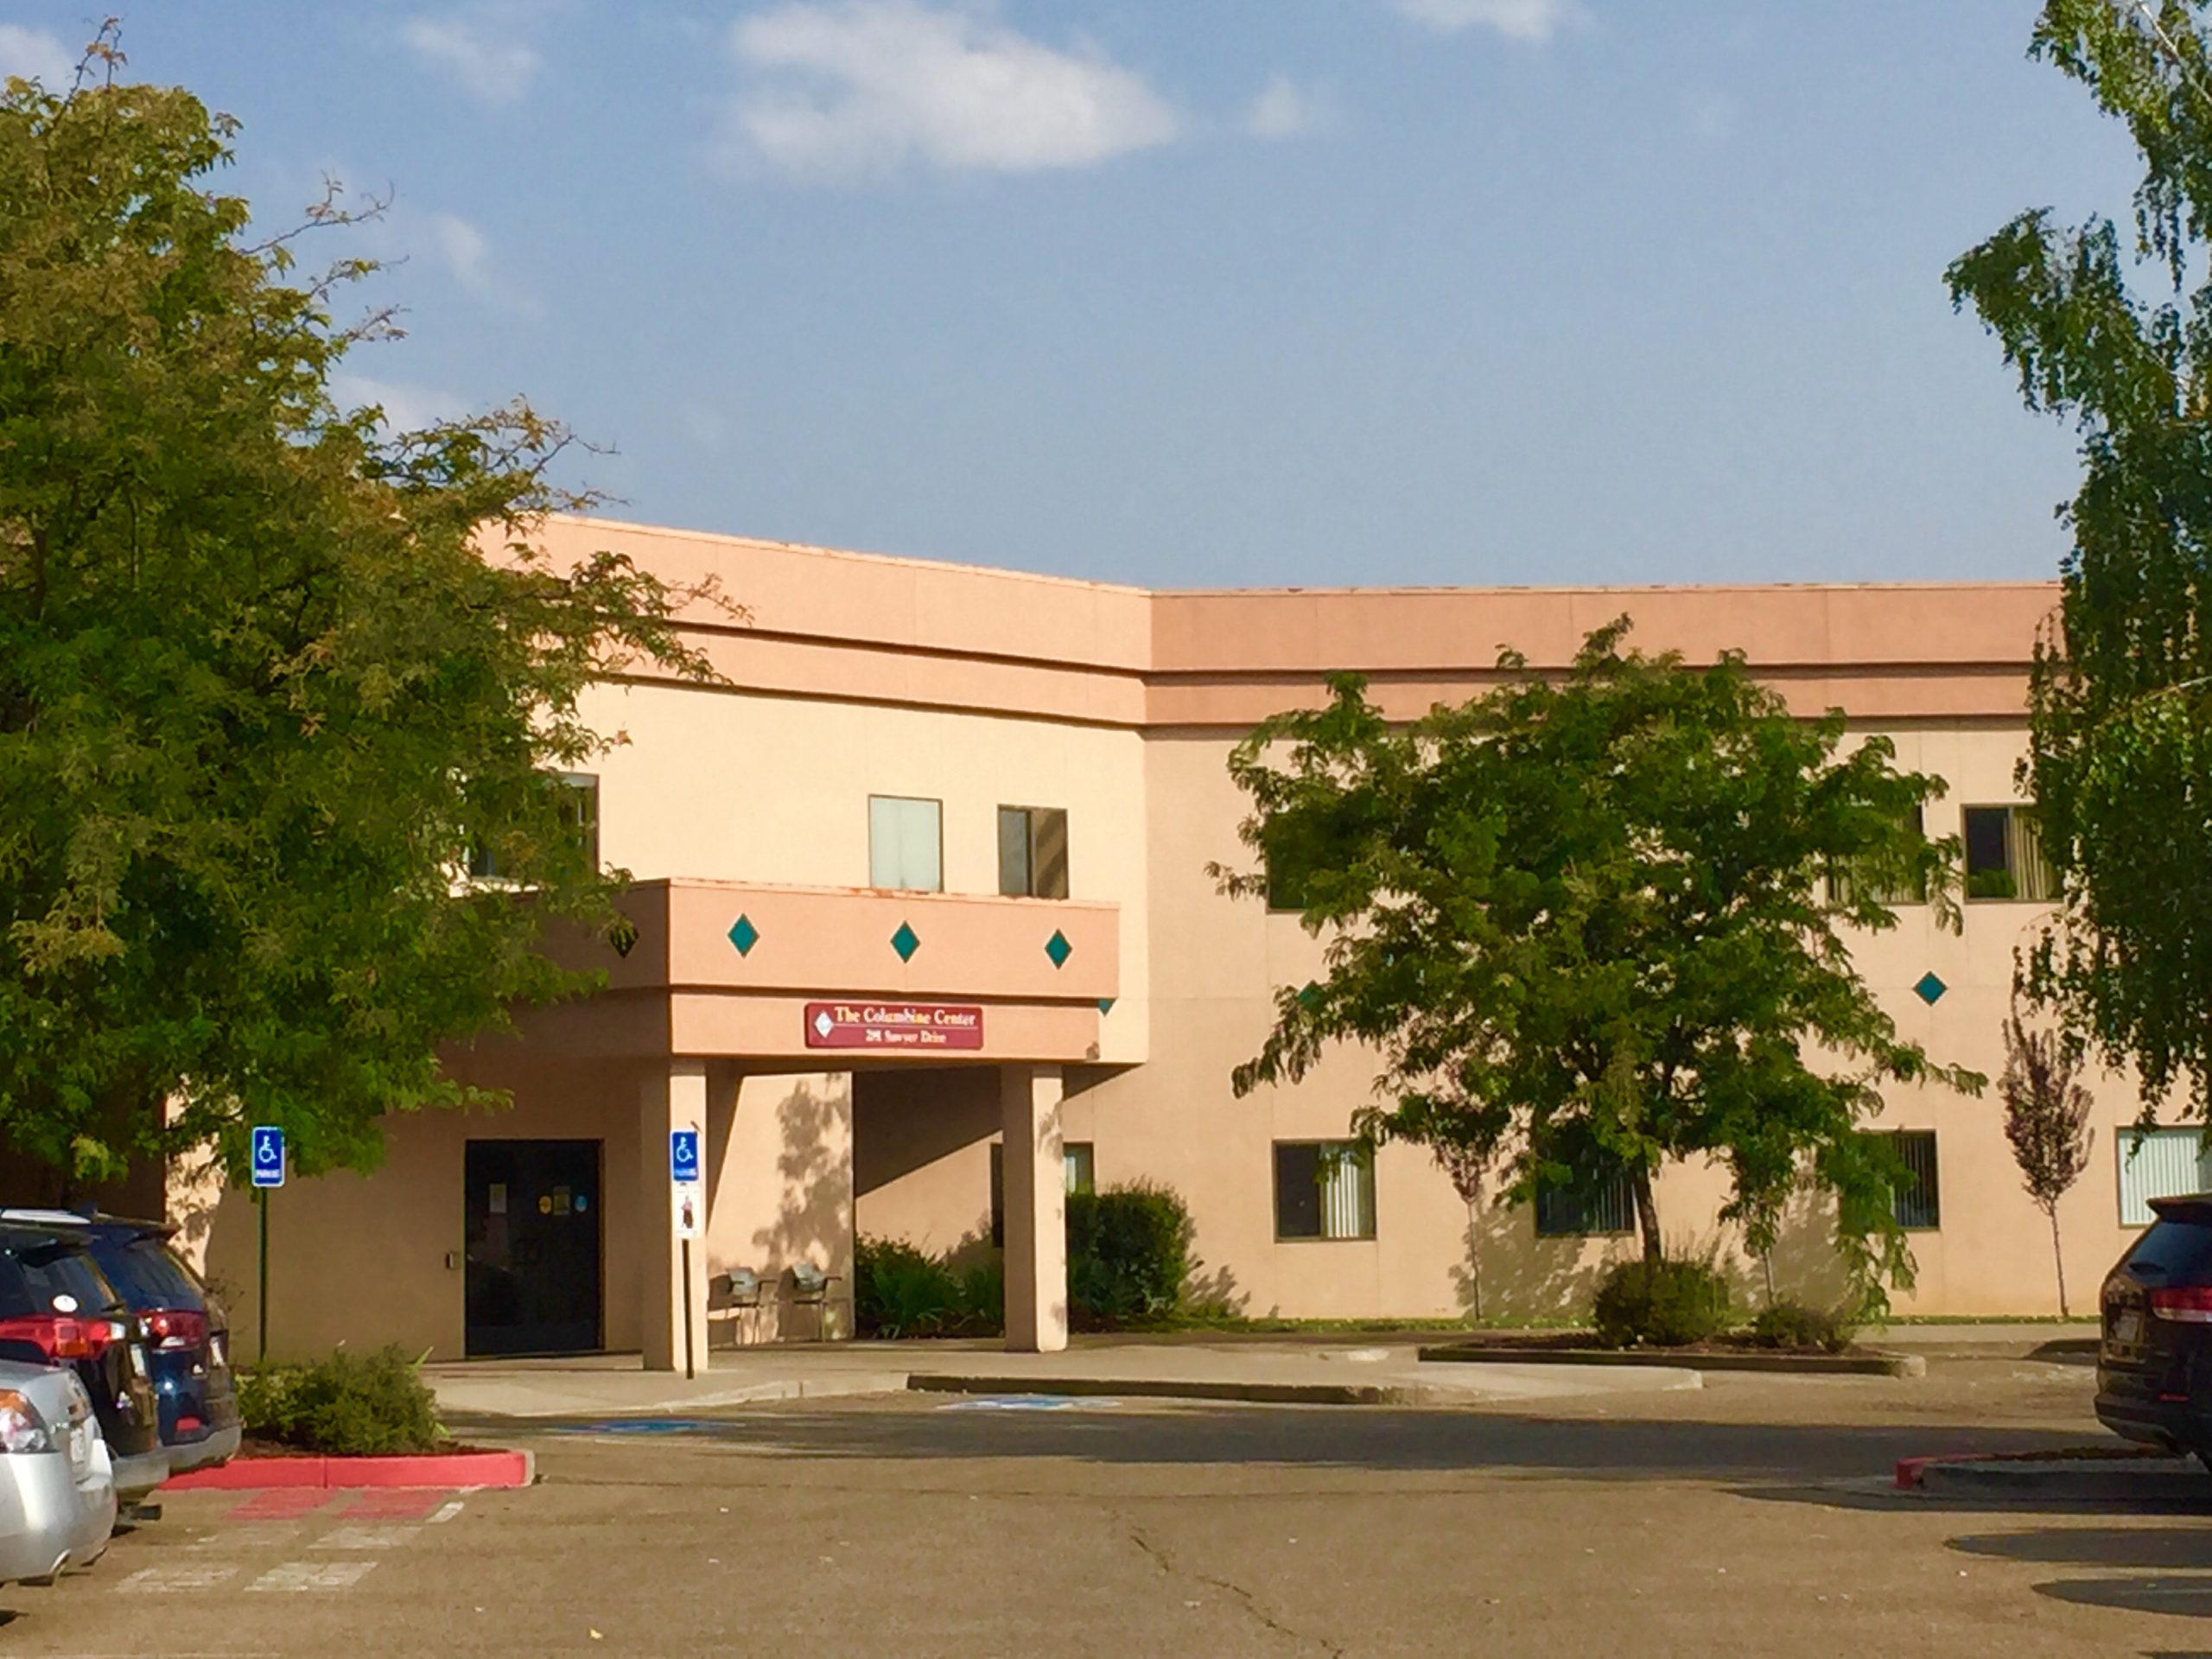 Columbine Behavioral Healthcare is located at 281 Sawyer Drive inBo